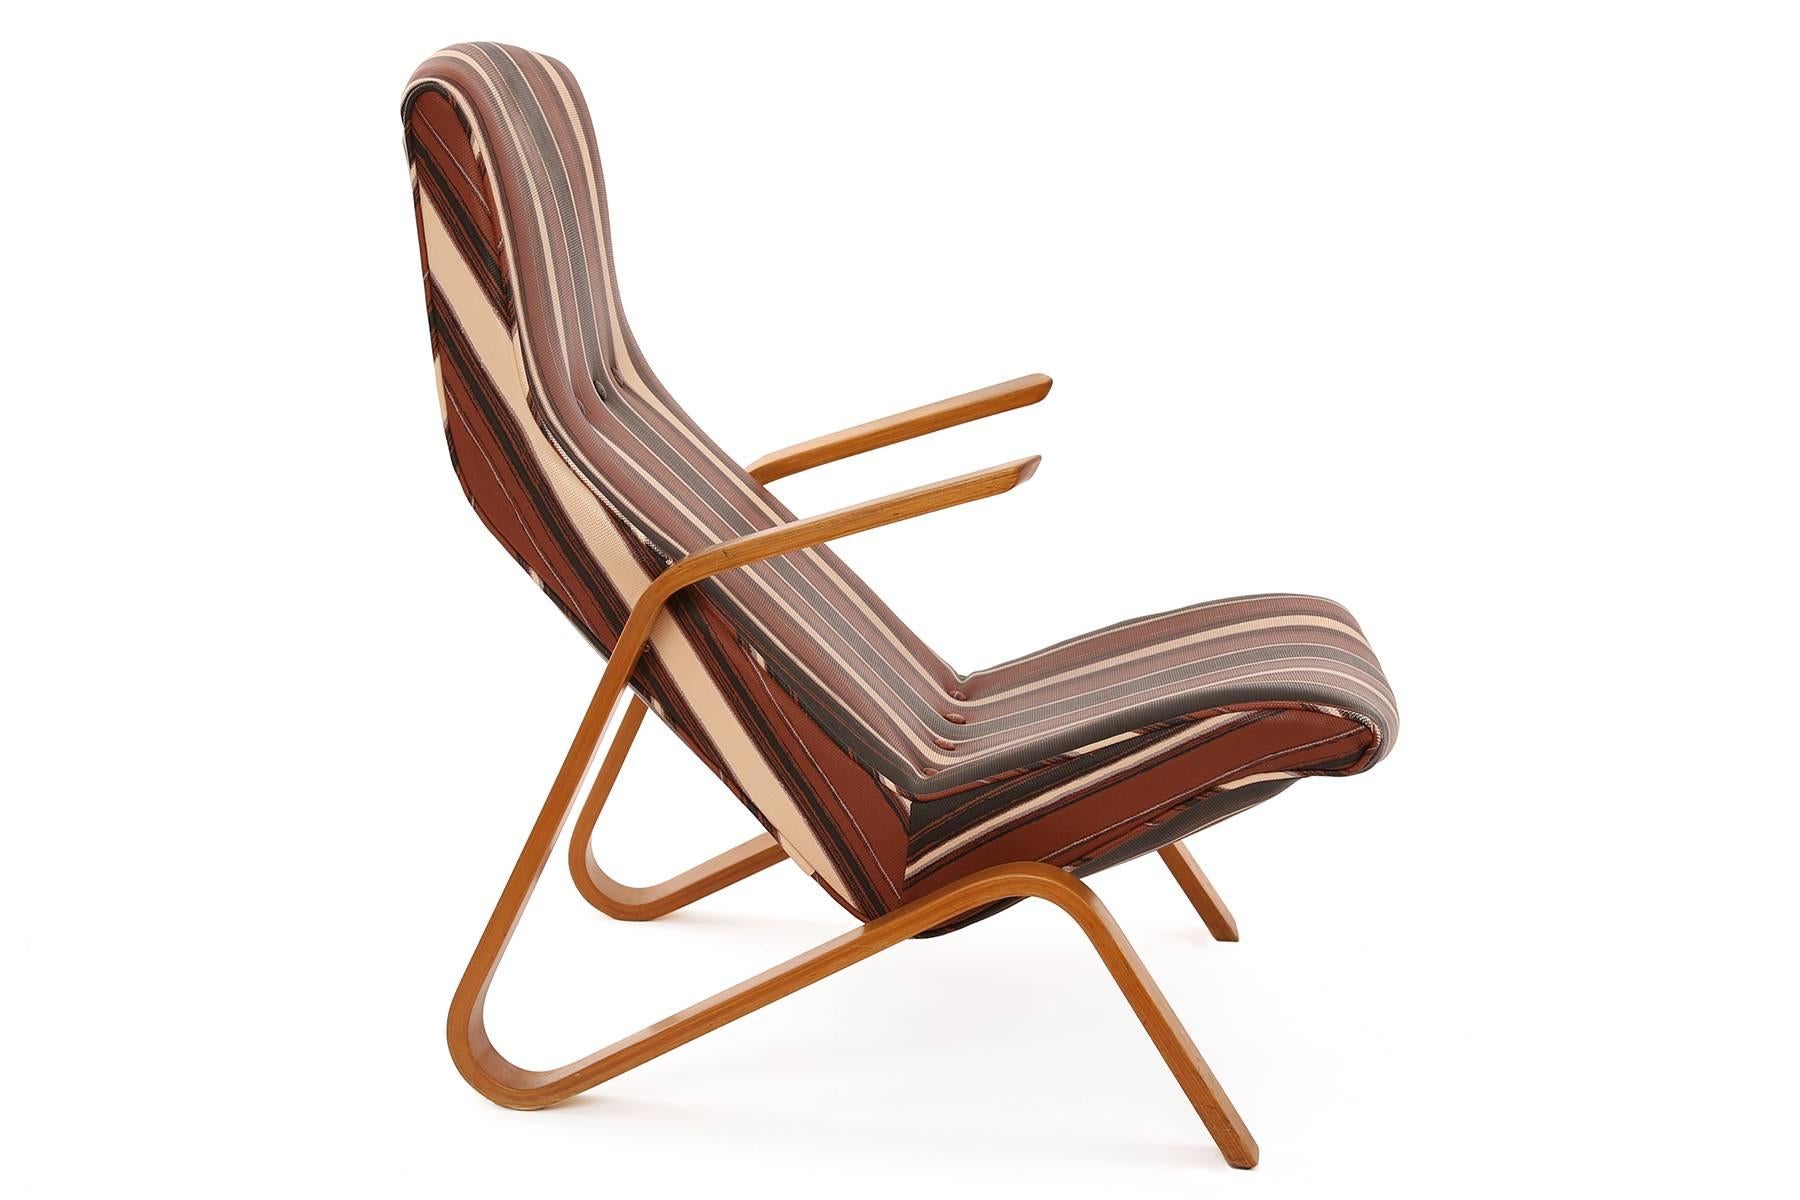 Eero Saarinen for Knoll Grasshopper chairs, circa early 1950s. These fabulous all original examples are upholstered in their original copper black and off-white striped textile. Original finish to the bentwood legs and arms as well. Price listed is